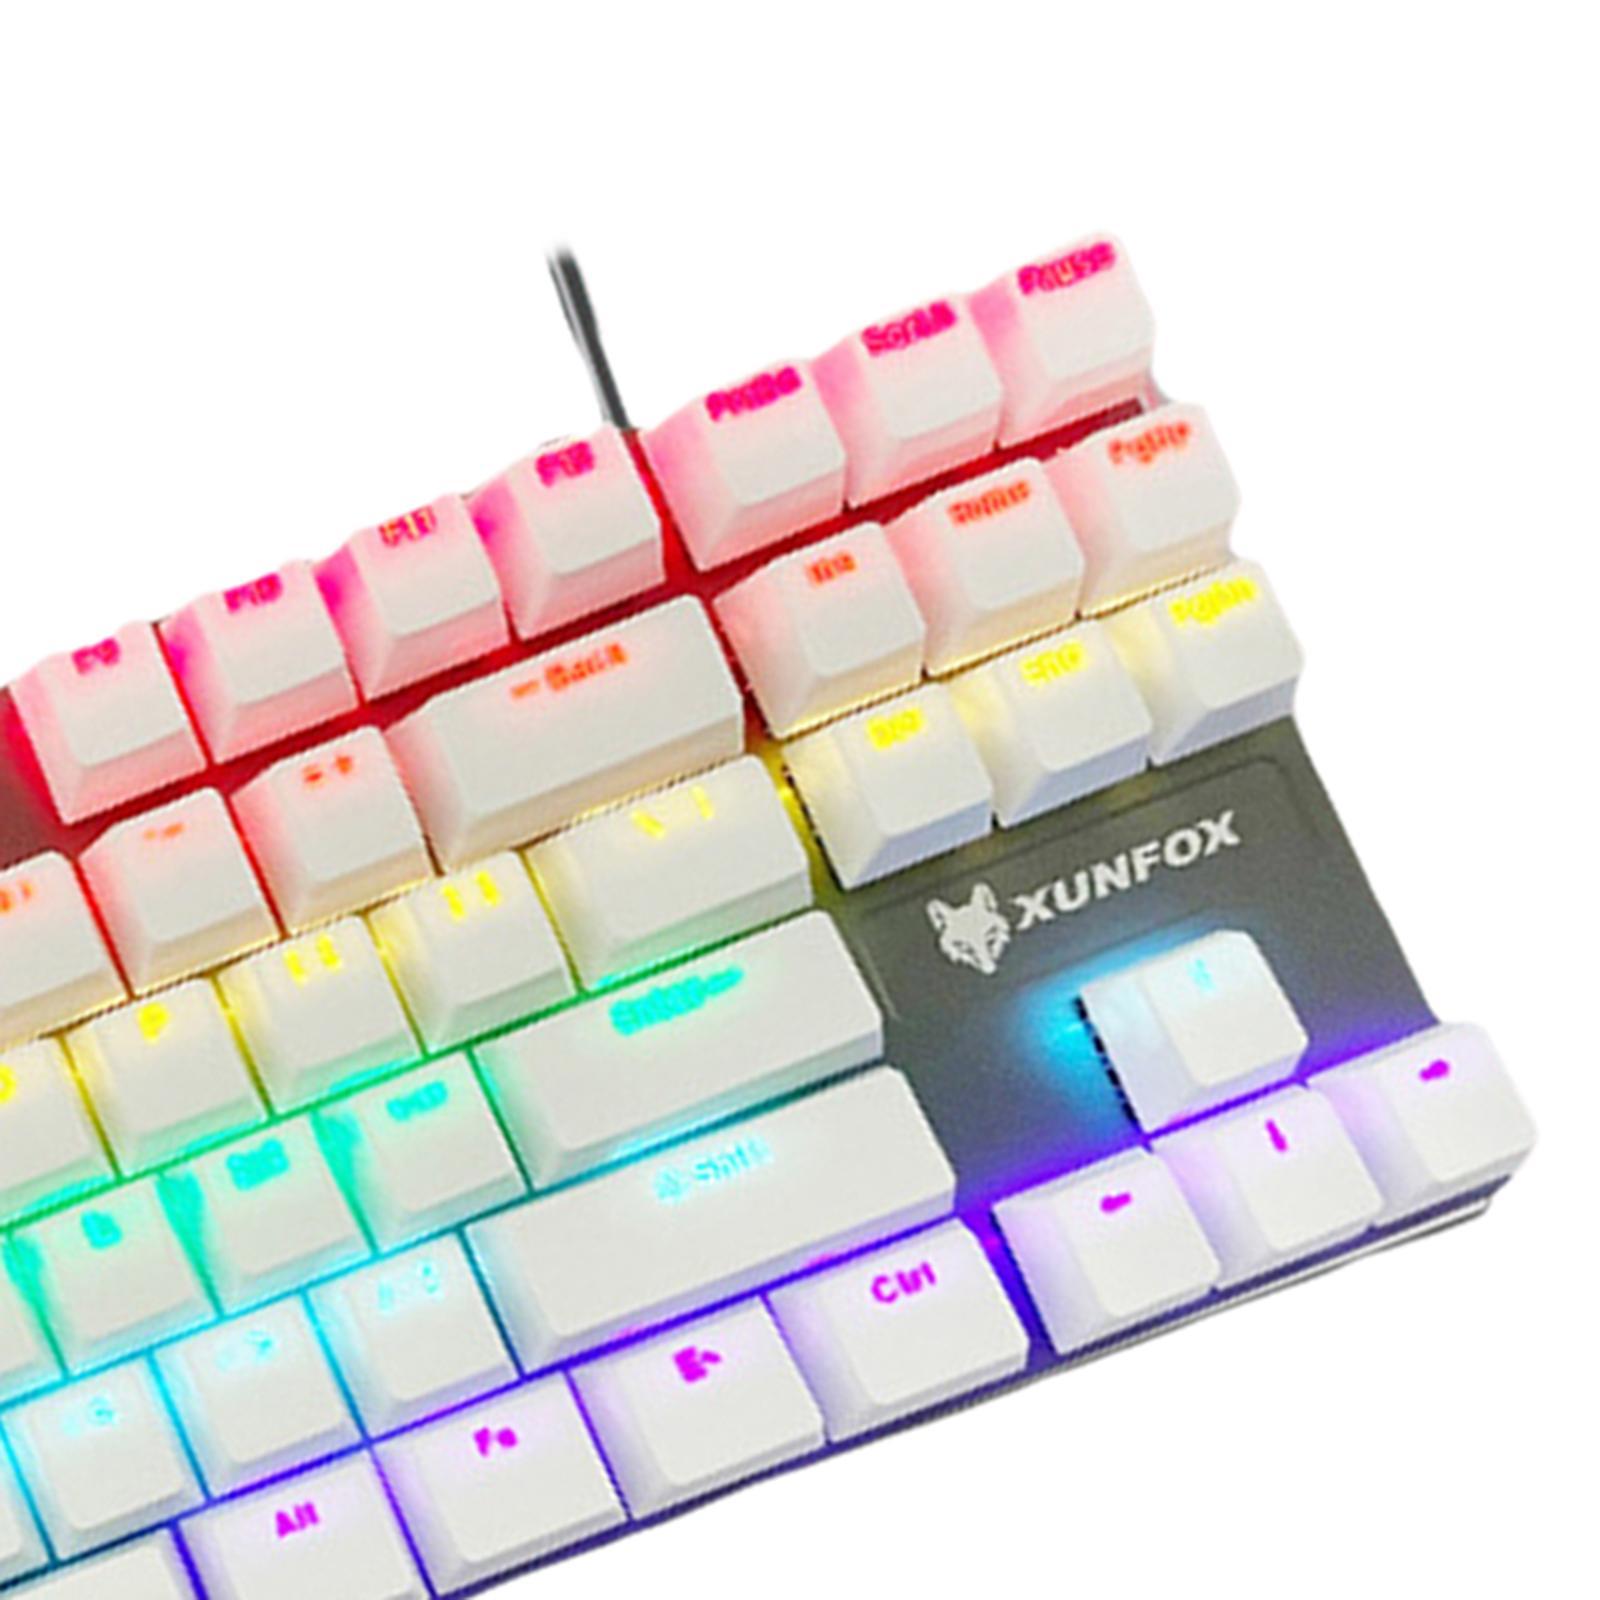 RGB 87 Keys Gaming Mechanical Keyboard USB Wired Space Saving for A